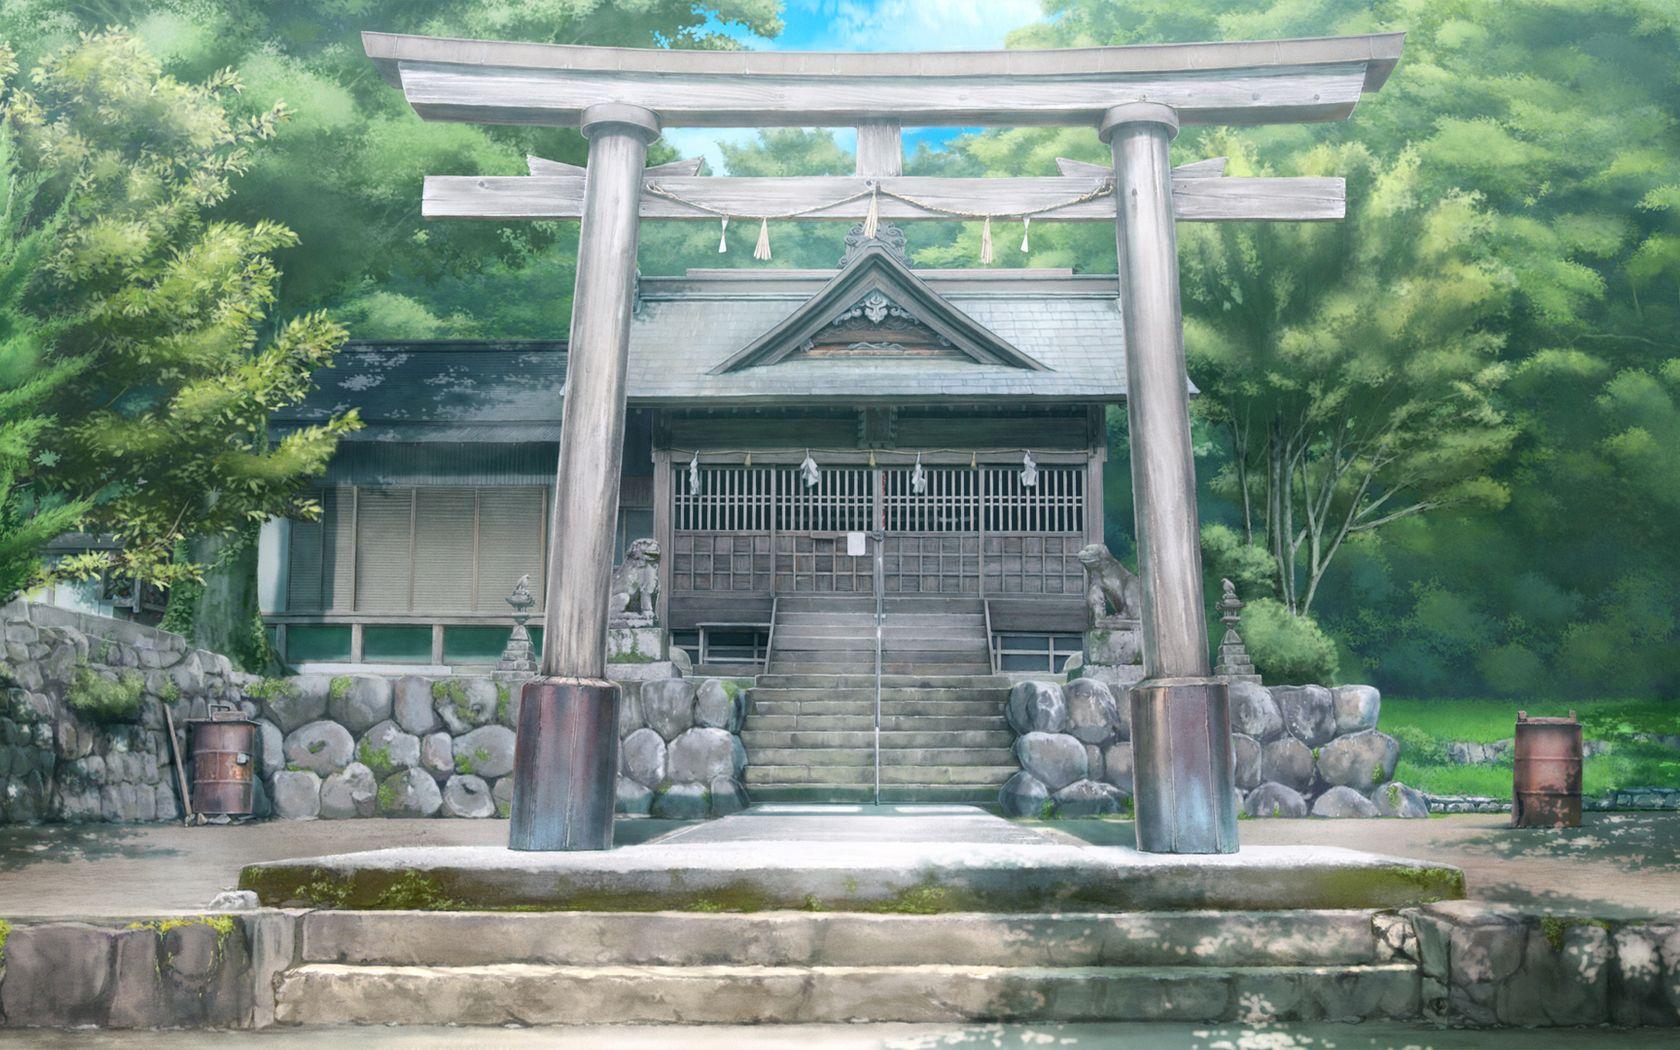 Your Name Wallpaper Shrine - Anime Temple Scenery - PS4Wallpapers.com